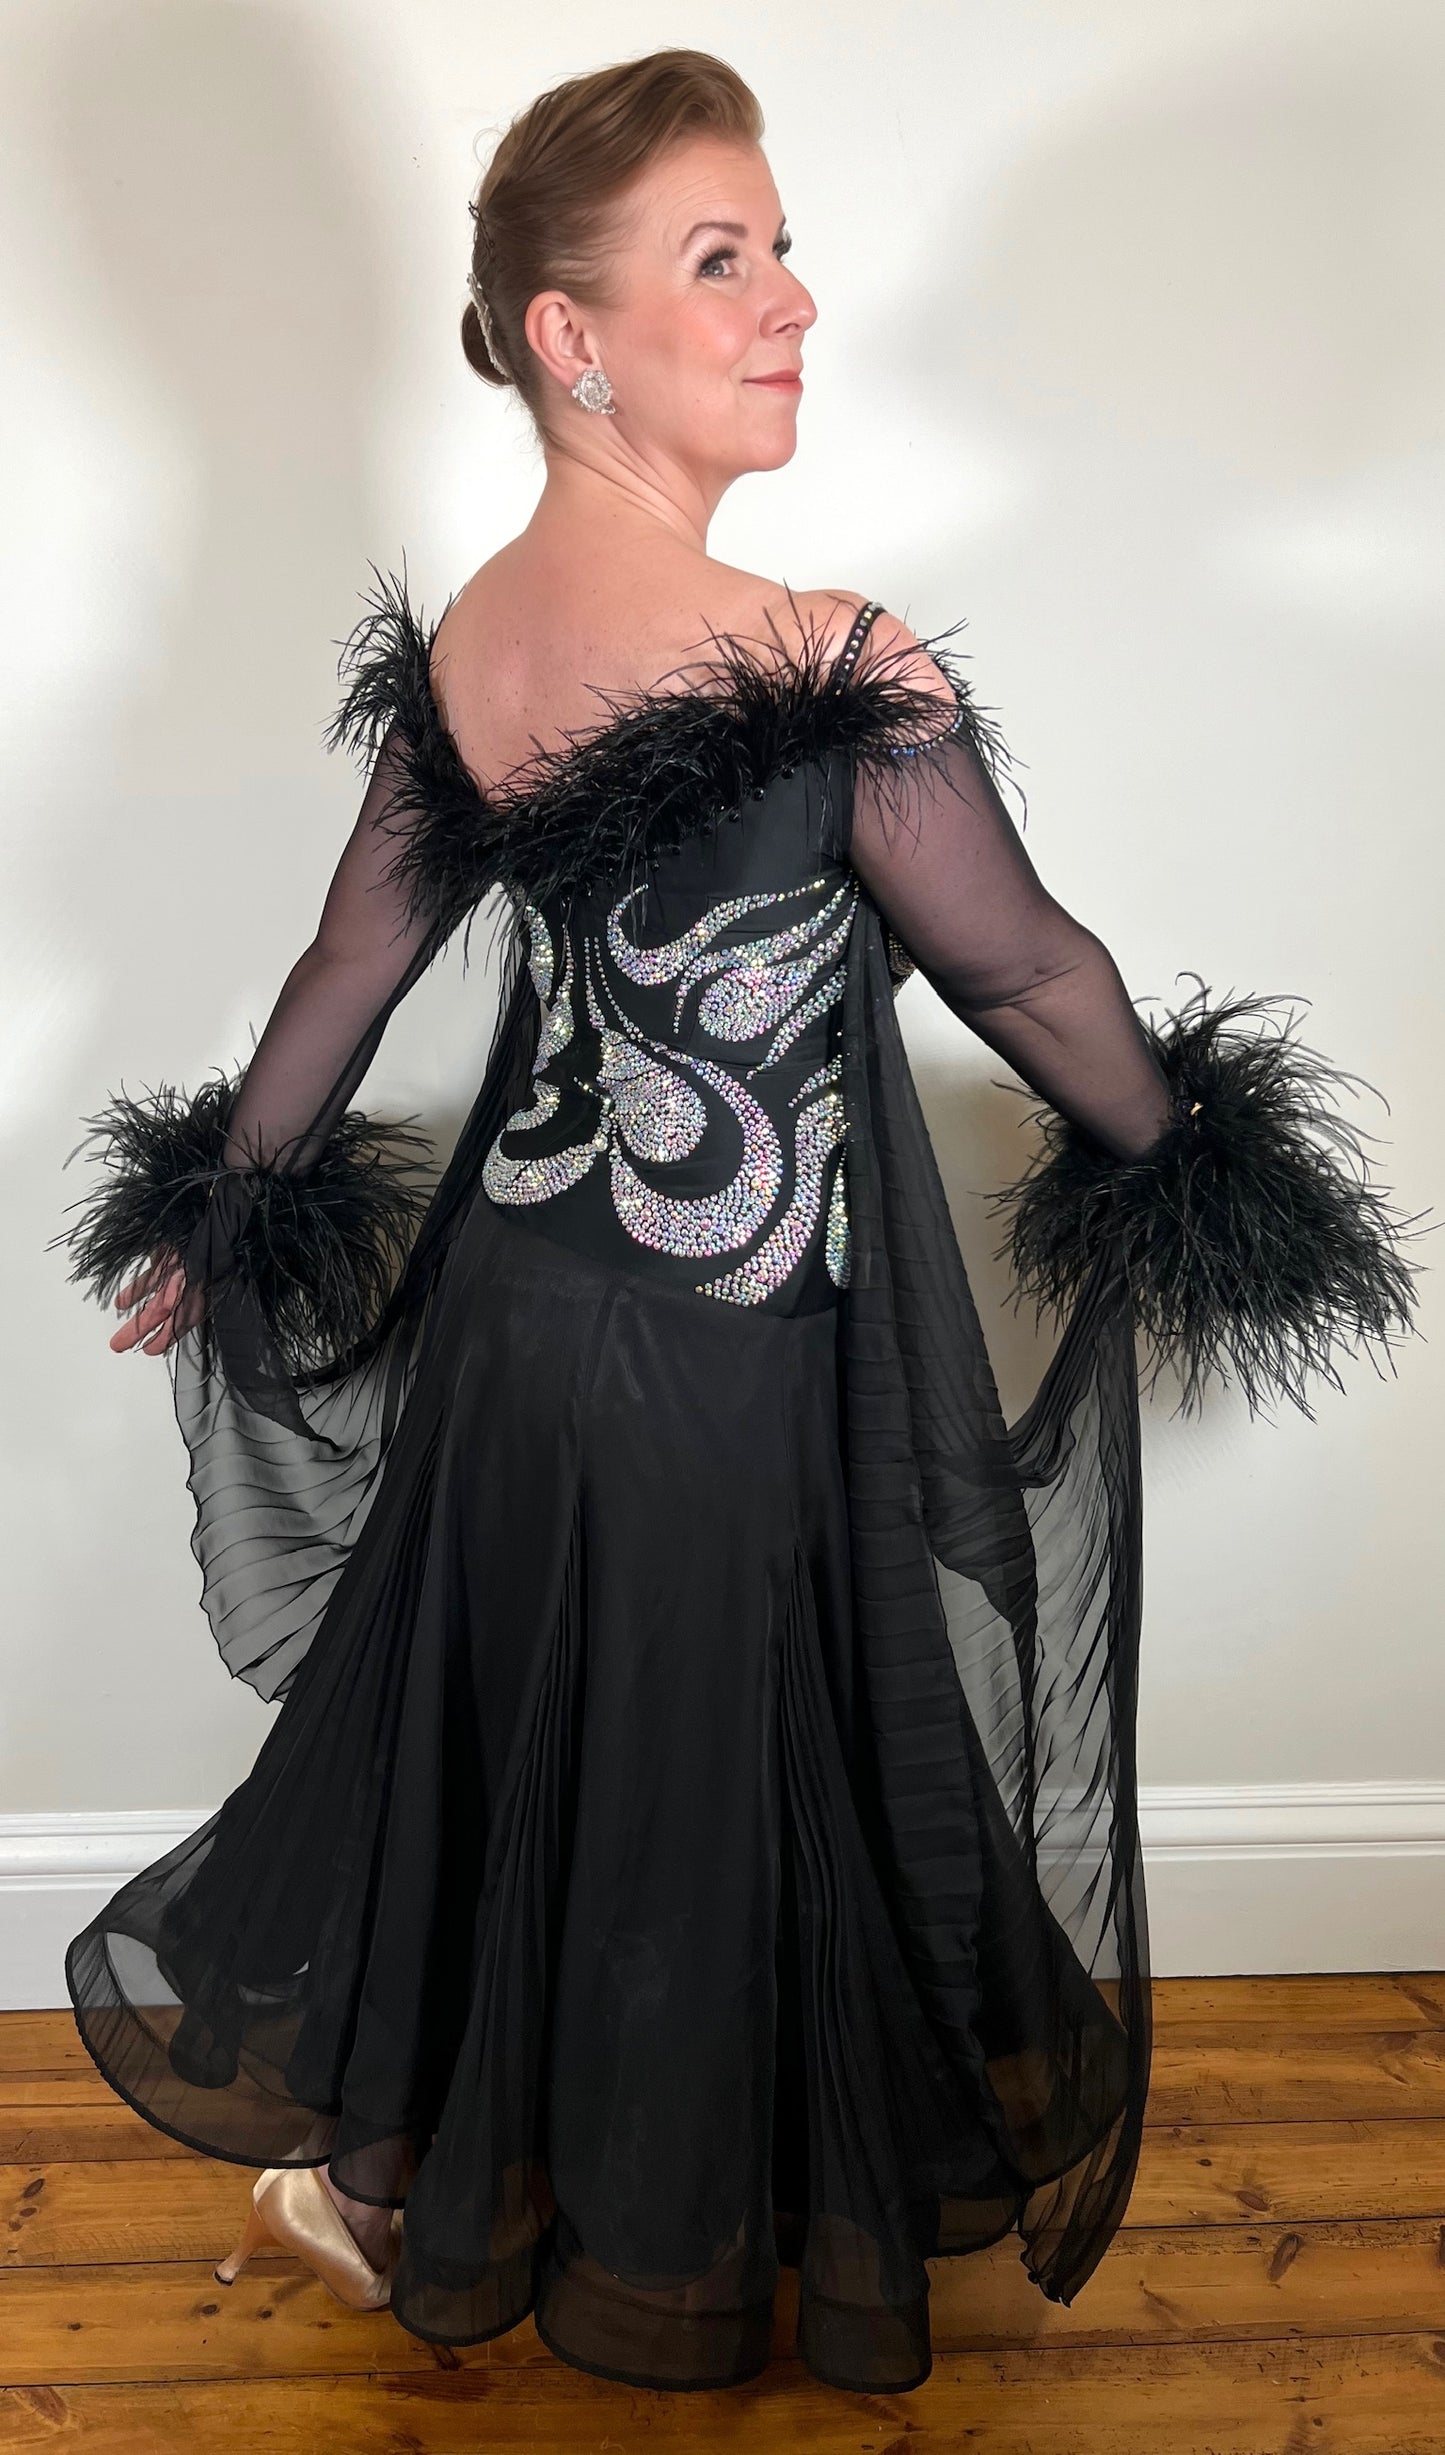 053 Black Competition Ballroom Dance Dress. Heavily stoned in AB with Ostrich feathers to the upper chest area. Detachable floats with ostrich feather cuffs.